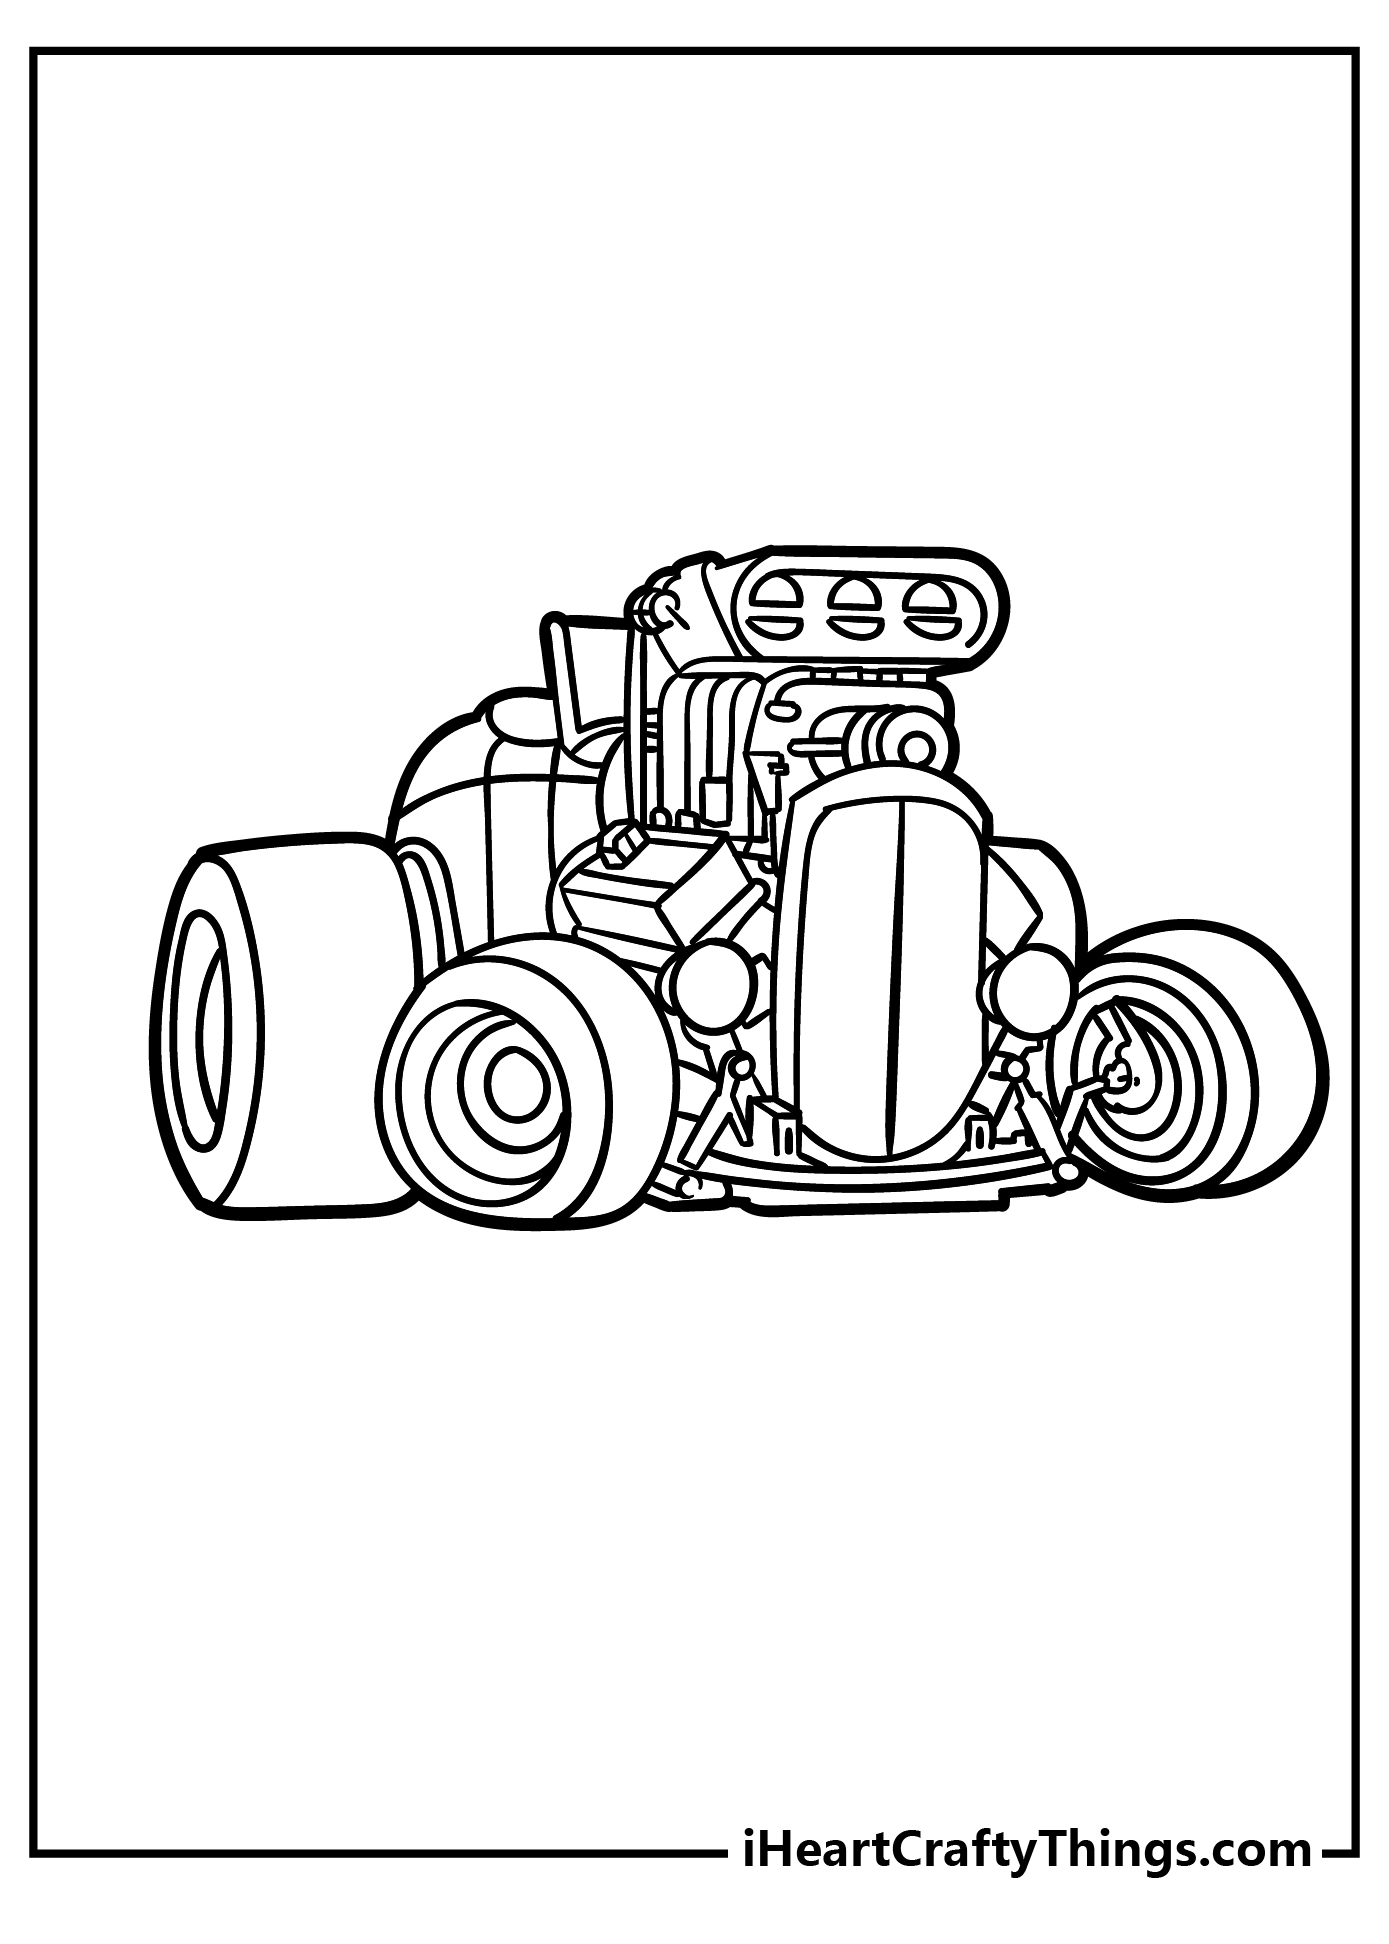 Hot Rod Coloring Pages for adults free printable